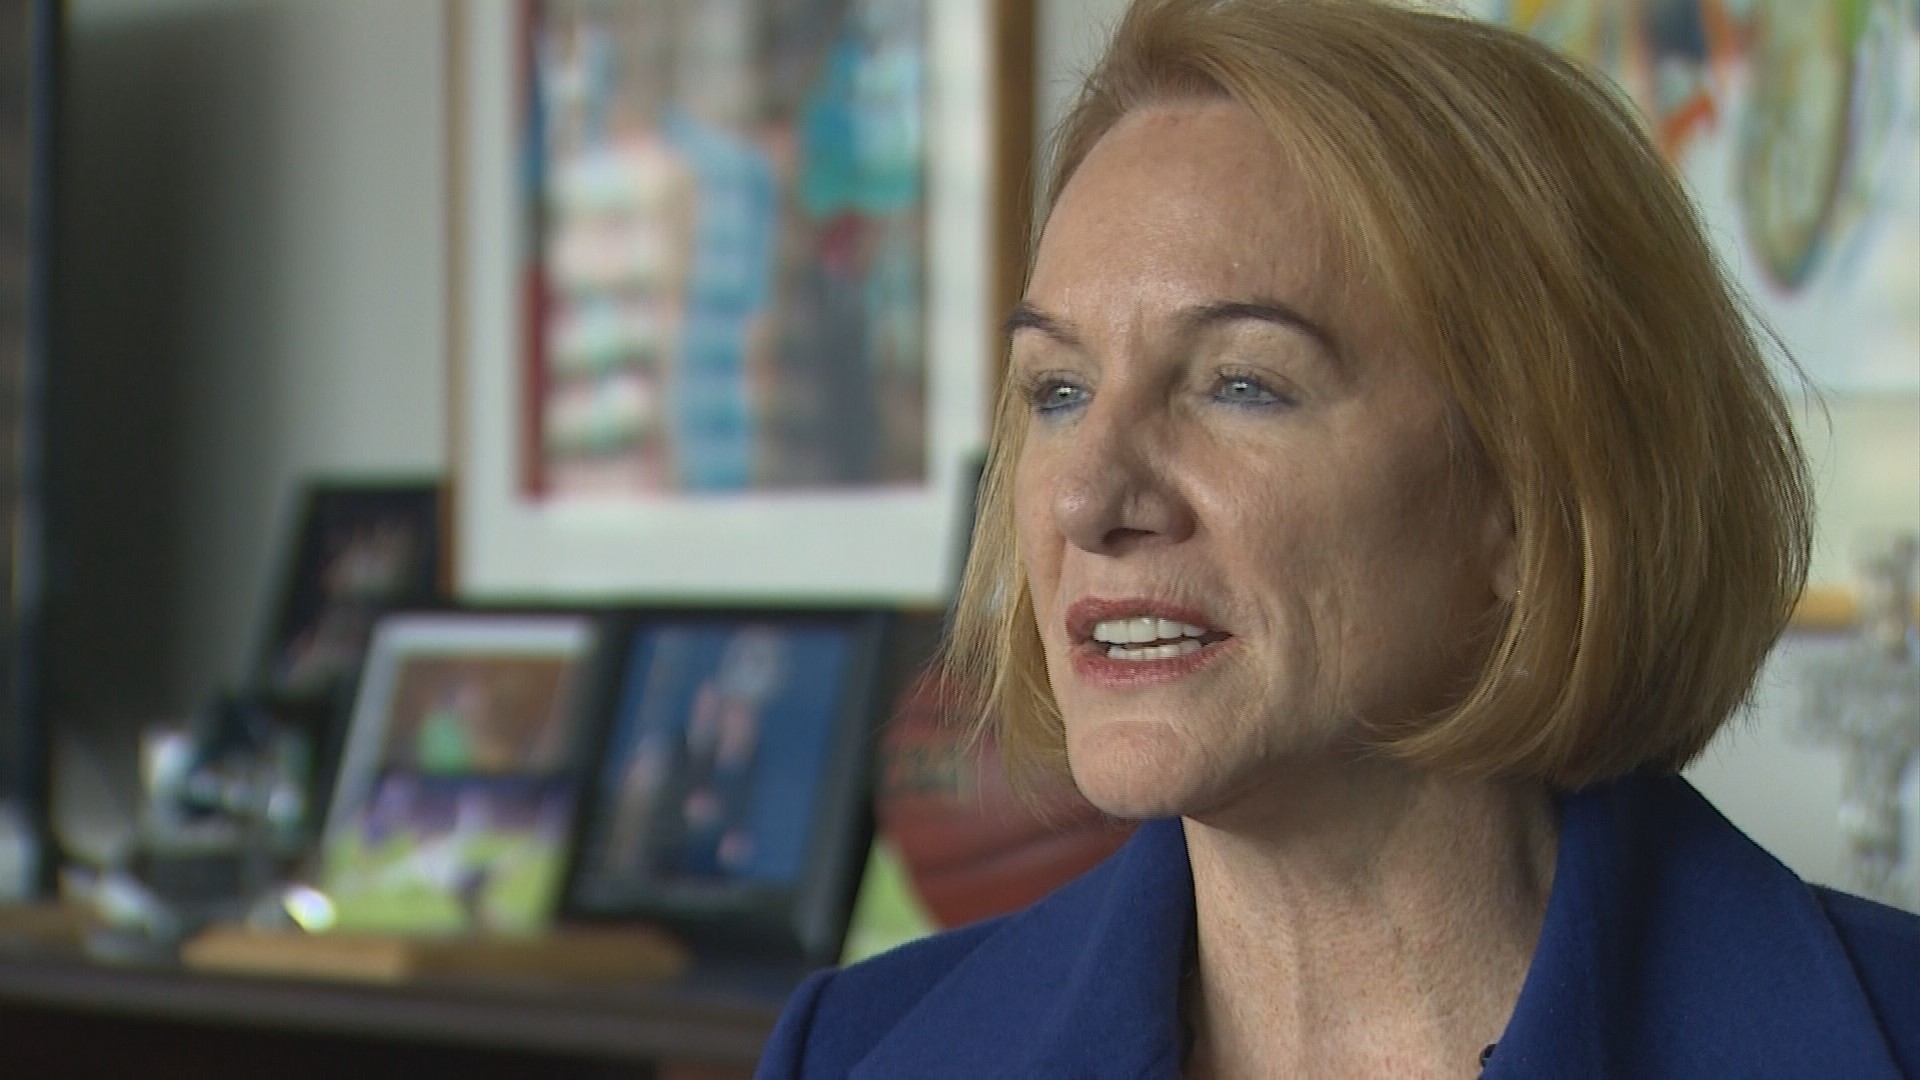 Seattle Mayor Jenny Durkan explains legislation that would allow city workers to access paid family leave benefits after the death of a child.